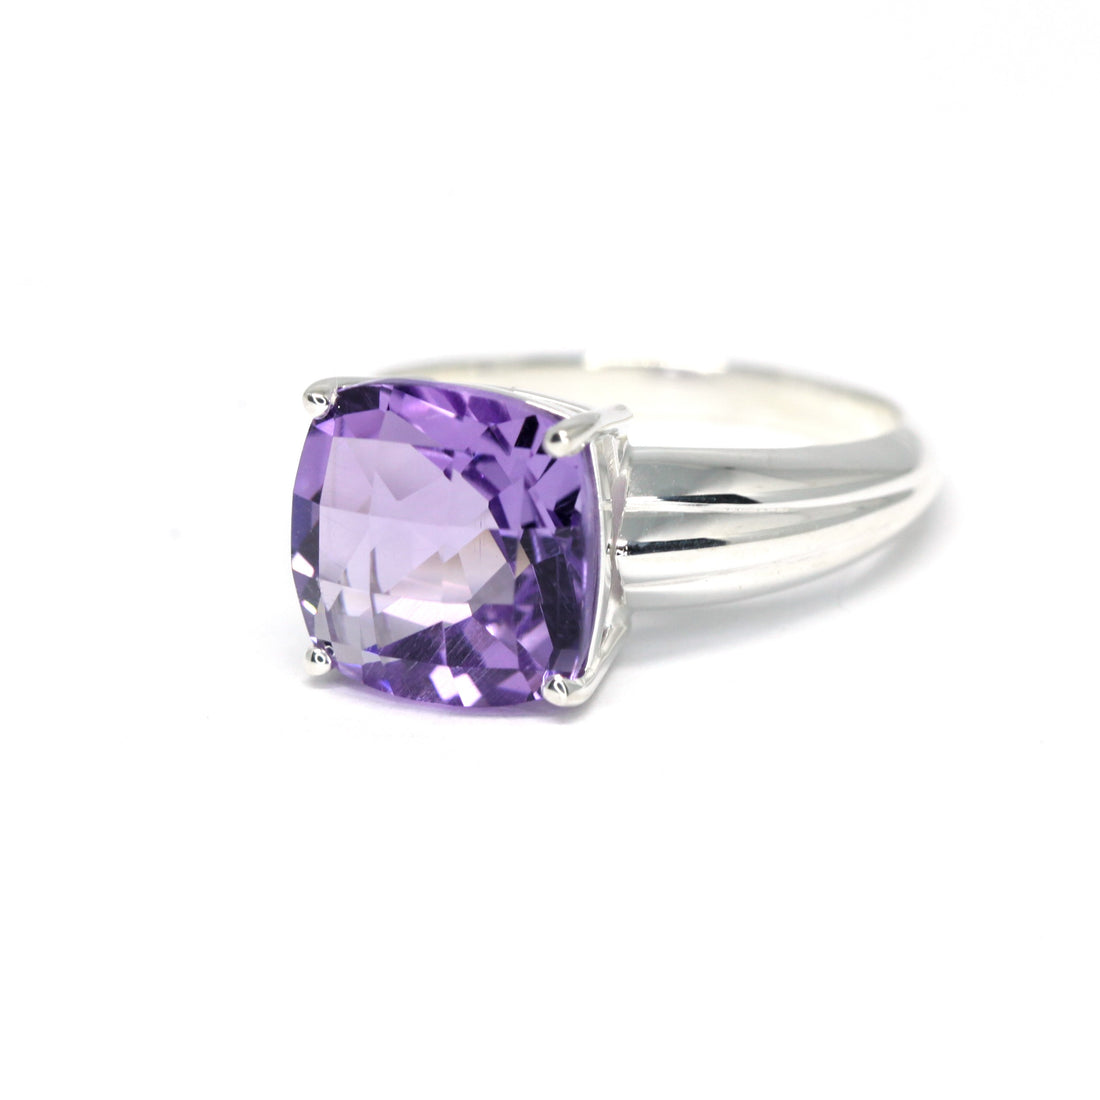 Cushion amethyst cocktail ring bena jewelry montreal made in canada custom made color gemstone bridal ring engagement ring unisex modern jewelry designer montreal little italy jeweler